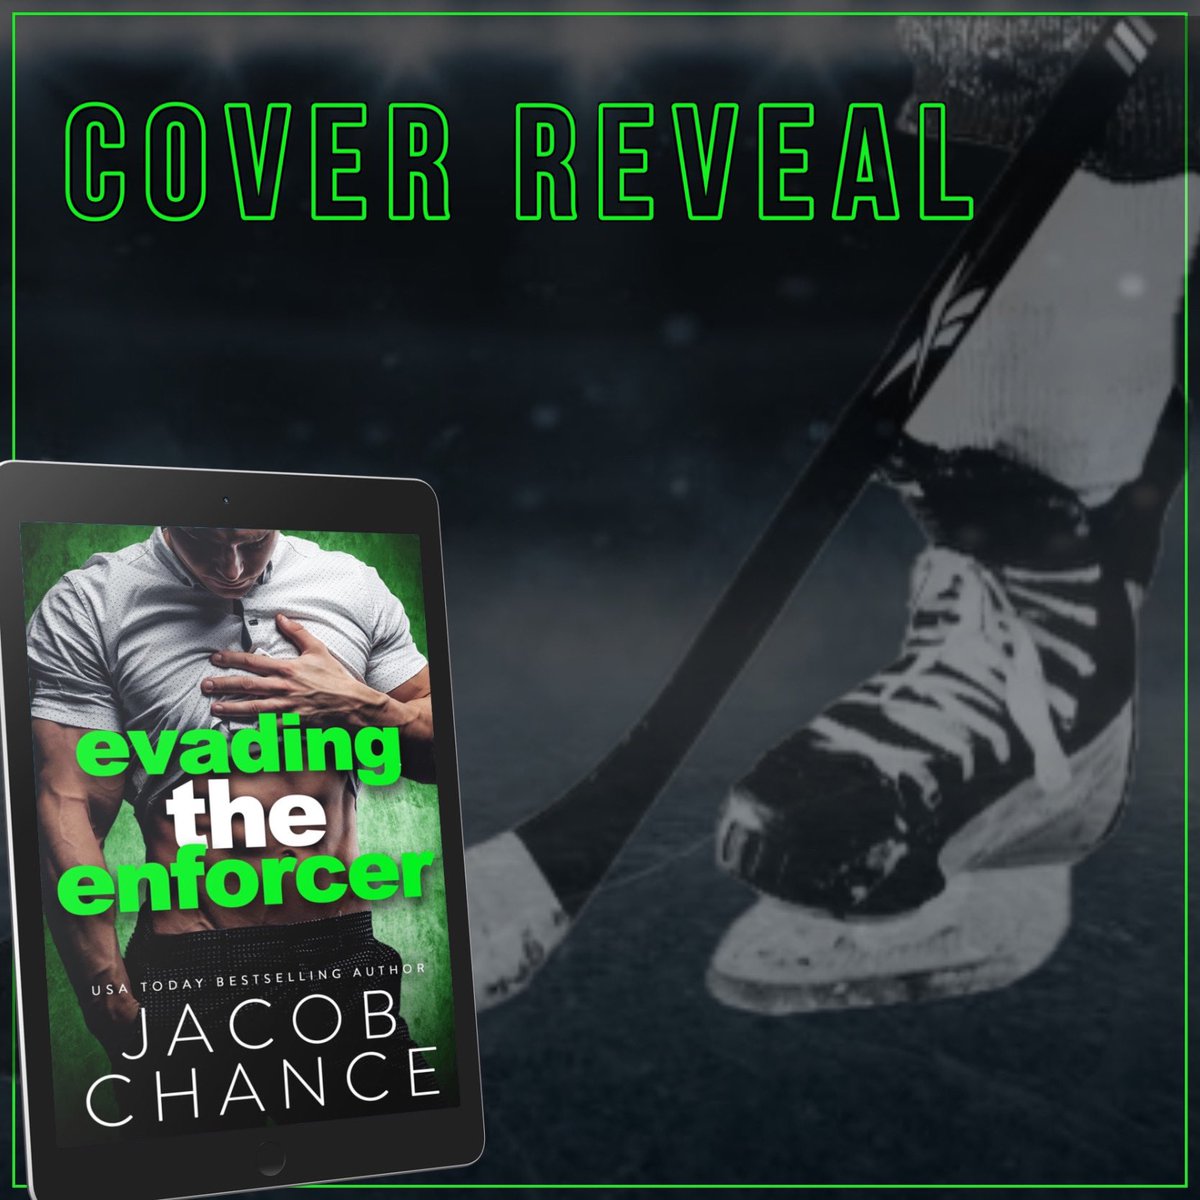 💚🏒 #CoverReveal 💚🏒

#ComingSoon from #AuthorJacobChance. 𝘌𝘝𝘈𝘋𝘐𝘕𝘎 𝘛𝘏𝘌 𝘌𝘕𝘍𝘖𝘙𝘊𝘌𝘙 will be the next book in the #CharlestonCoyotesSeries. 

Go to bit.ly/47DLMdX for details.

#HockeyRomance #RomCom #FakeEngagement #UpcomingRelease